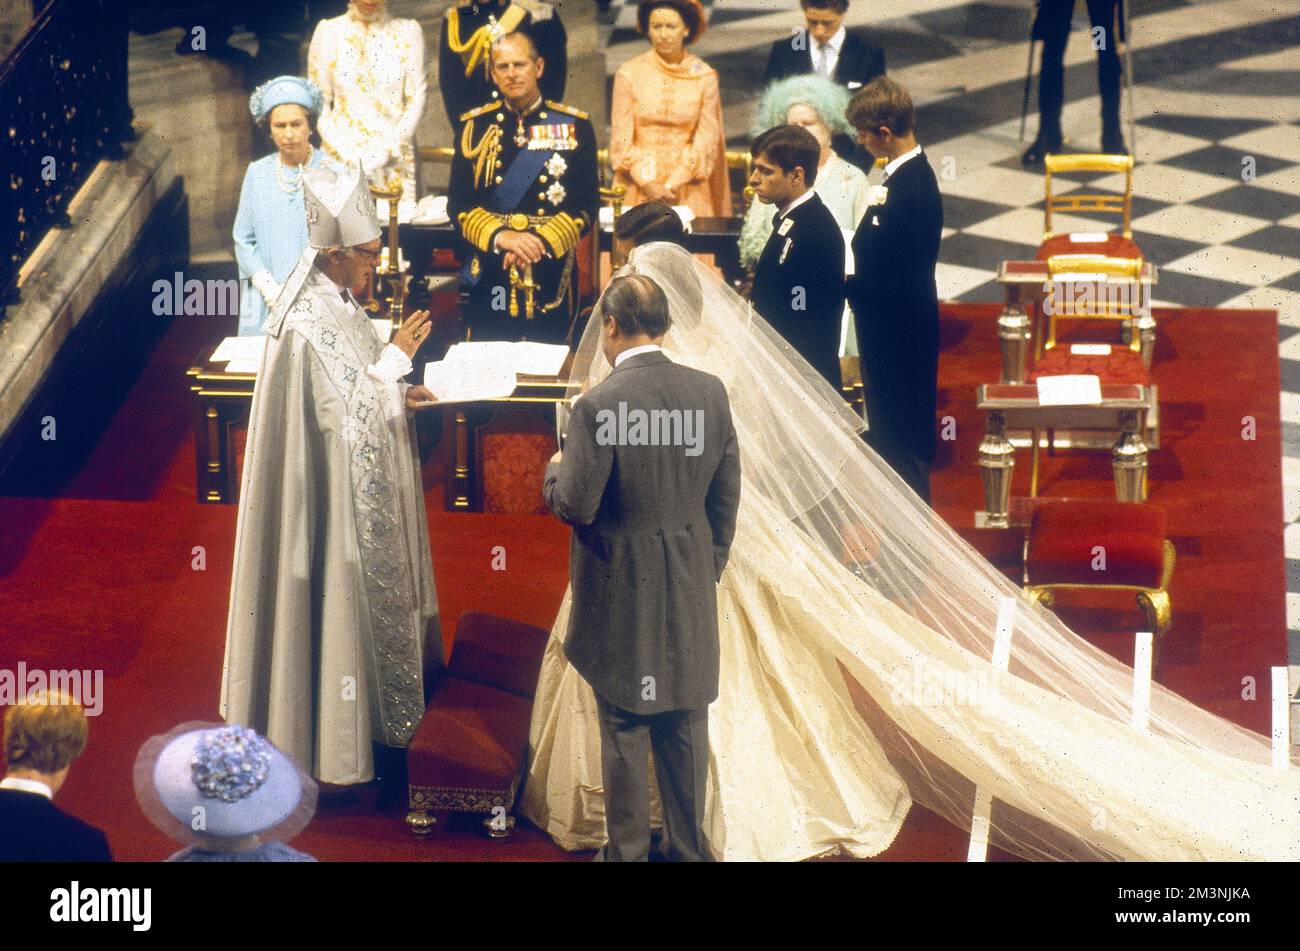 Prince Charles (Prince of Wales) and Lady Diana Spencer are married by the Archbishop of Canterbury, Robert Runcie in St Paul's Cathedral on 29 July 1981 in front of the Queen and other prominent members of the royal family.  The bride's father, Earl Spencer stands by ready to give his daughter away.     Date: 1981 Stock Photo